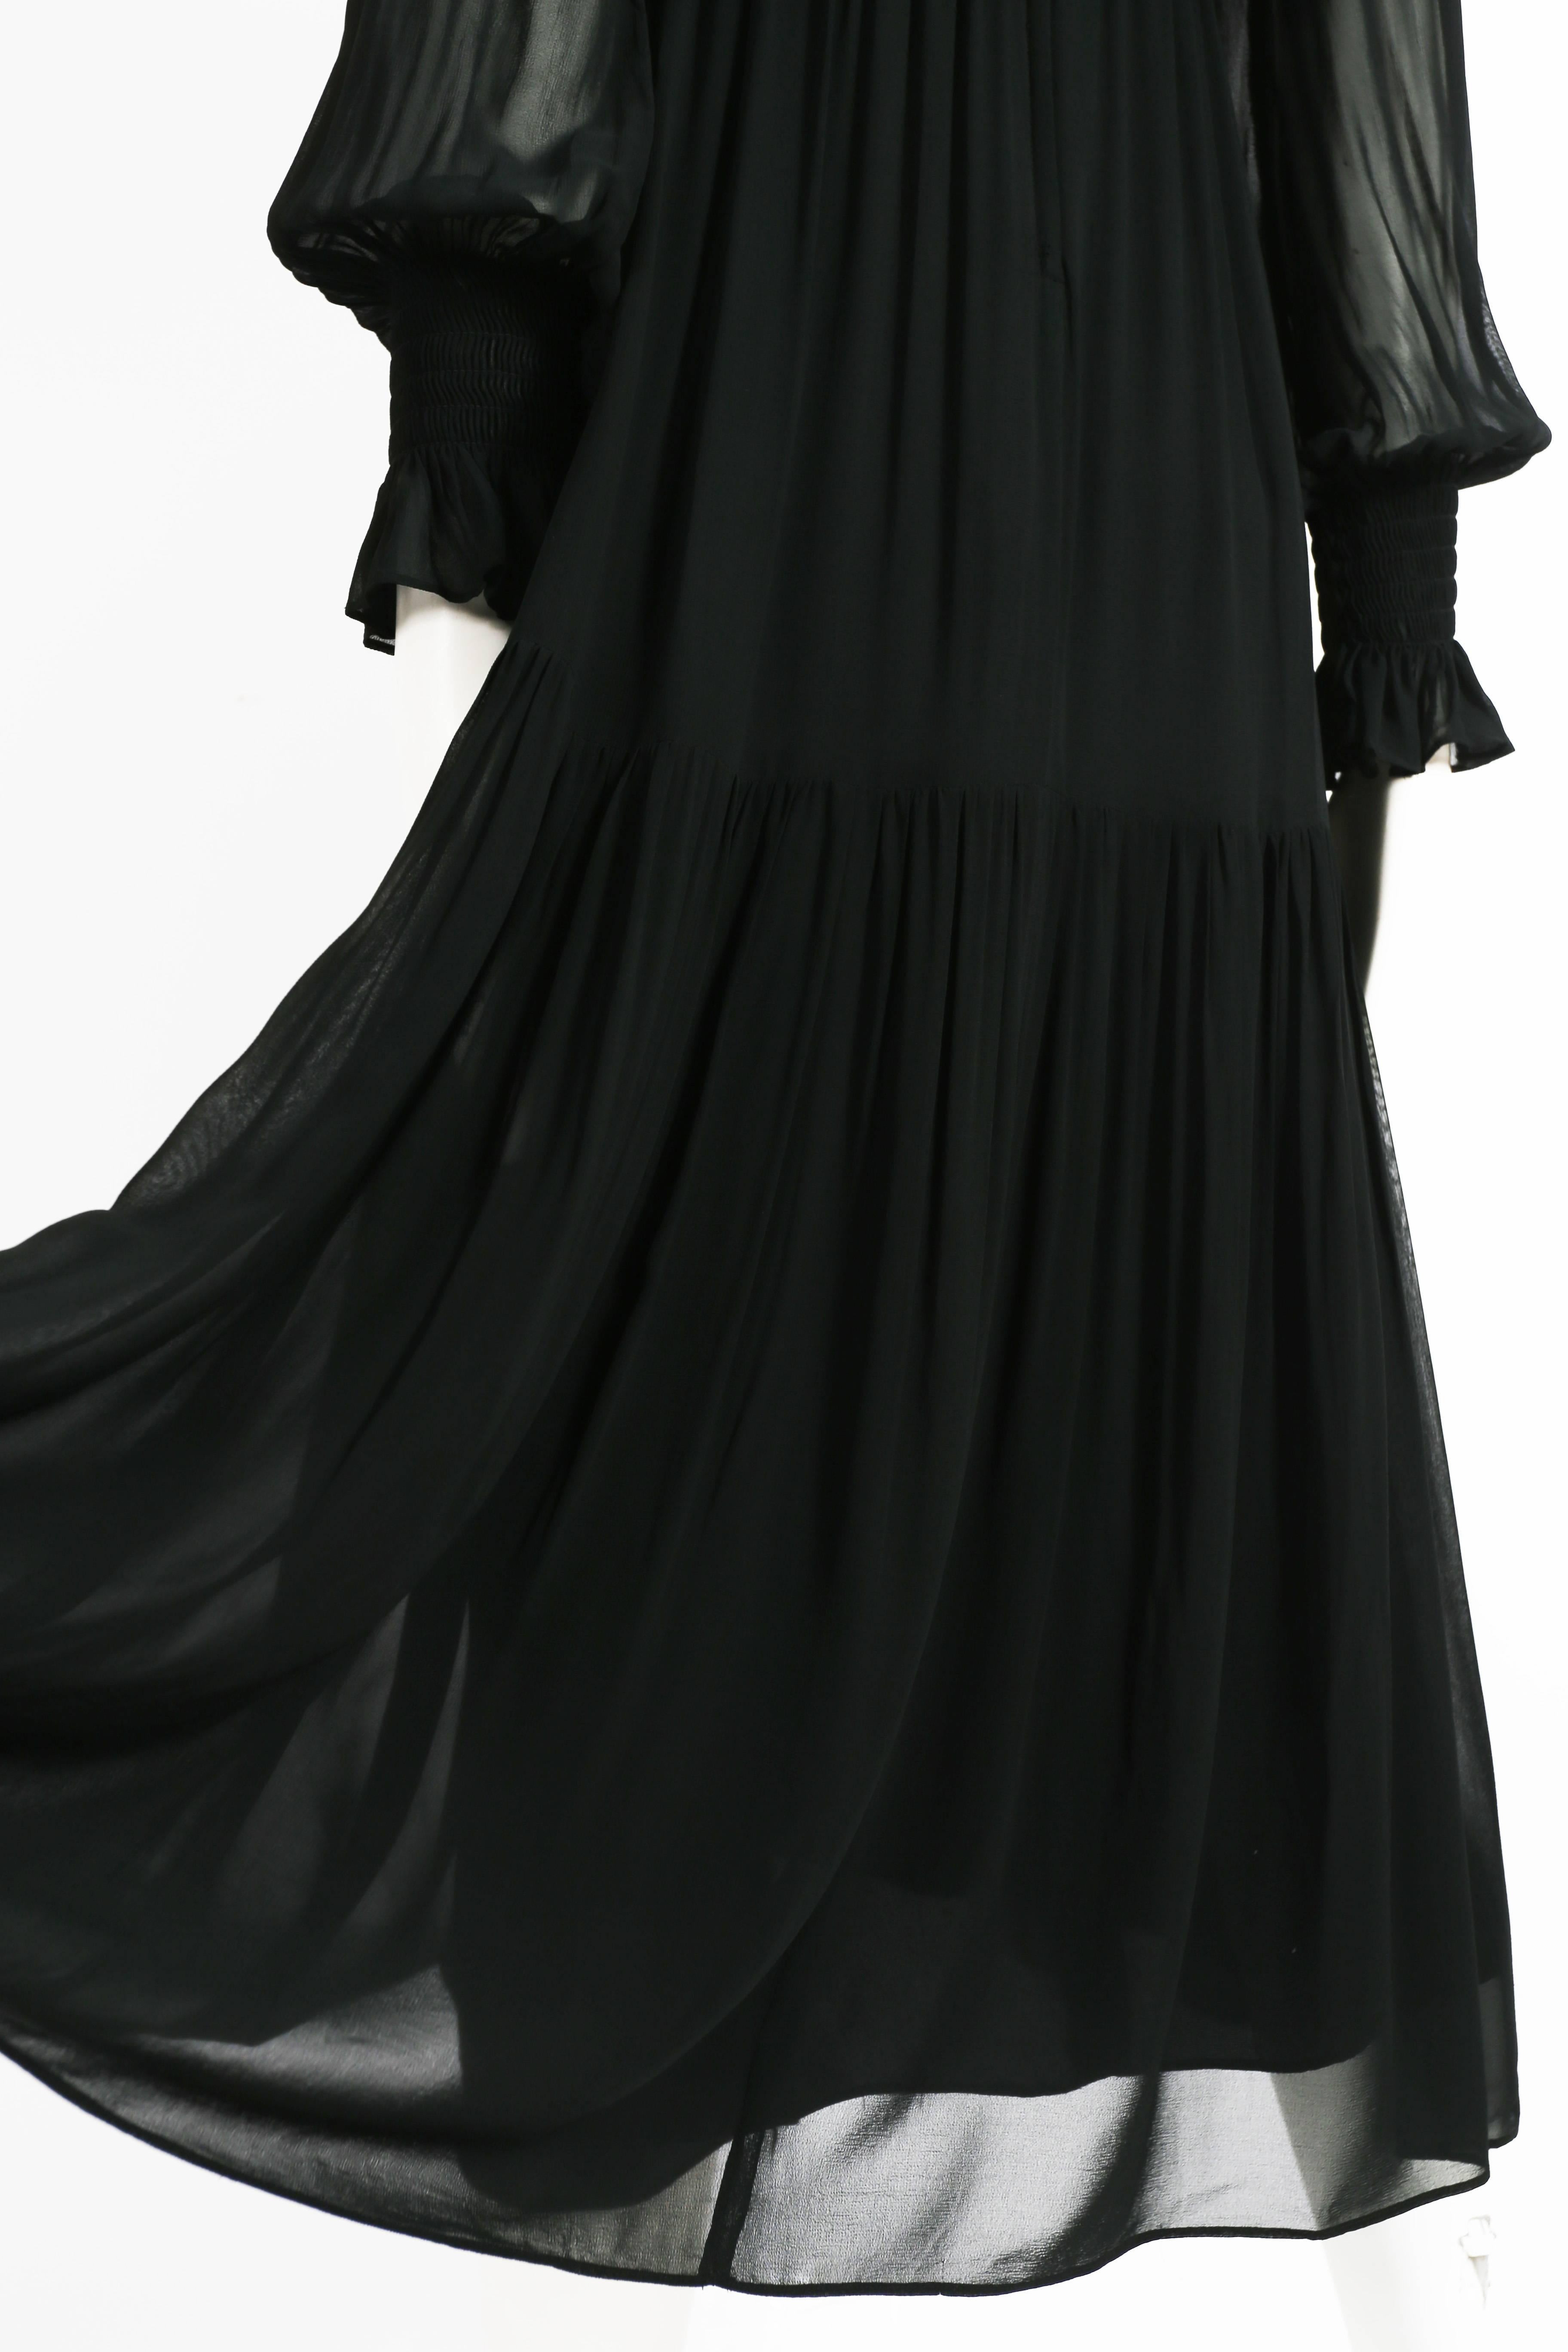 Ossie Clark black chiffon tiered evening dress with capelet, circa 1972 4